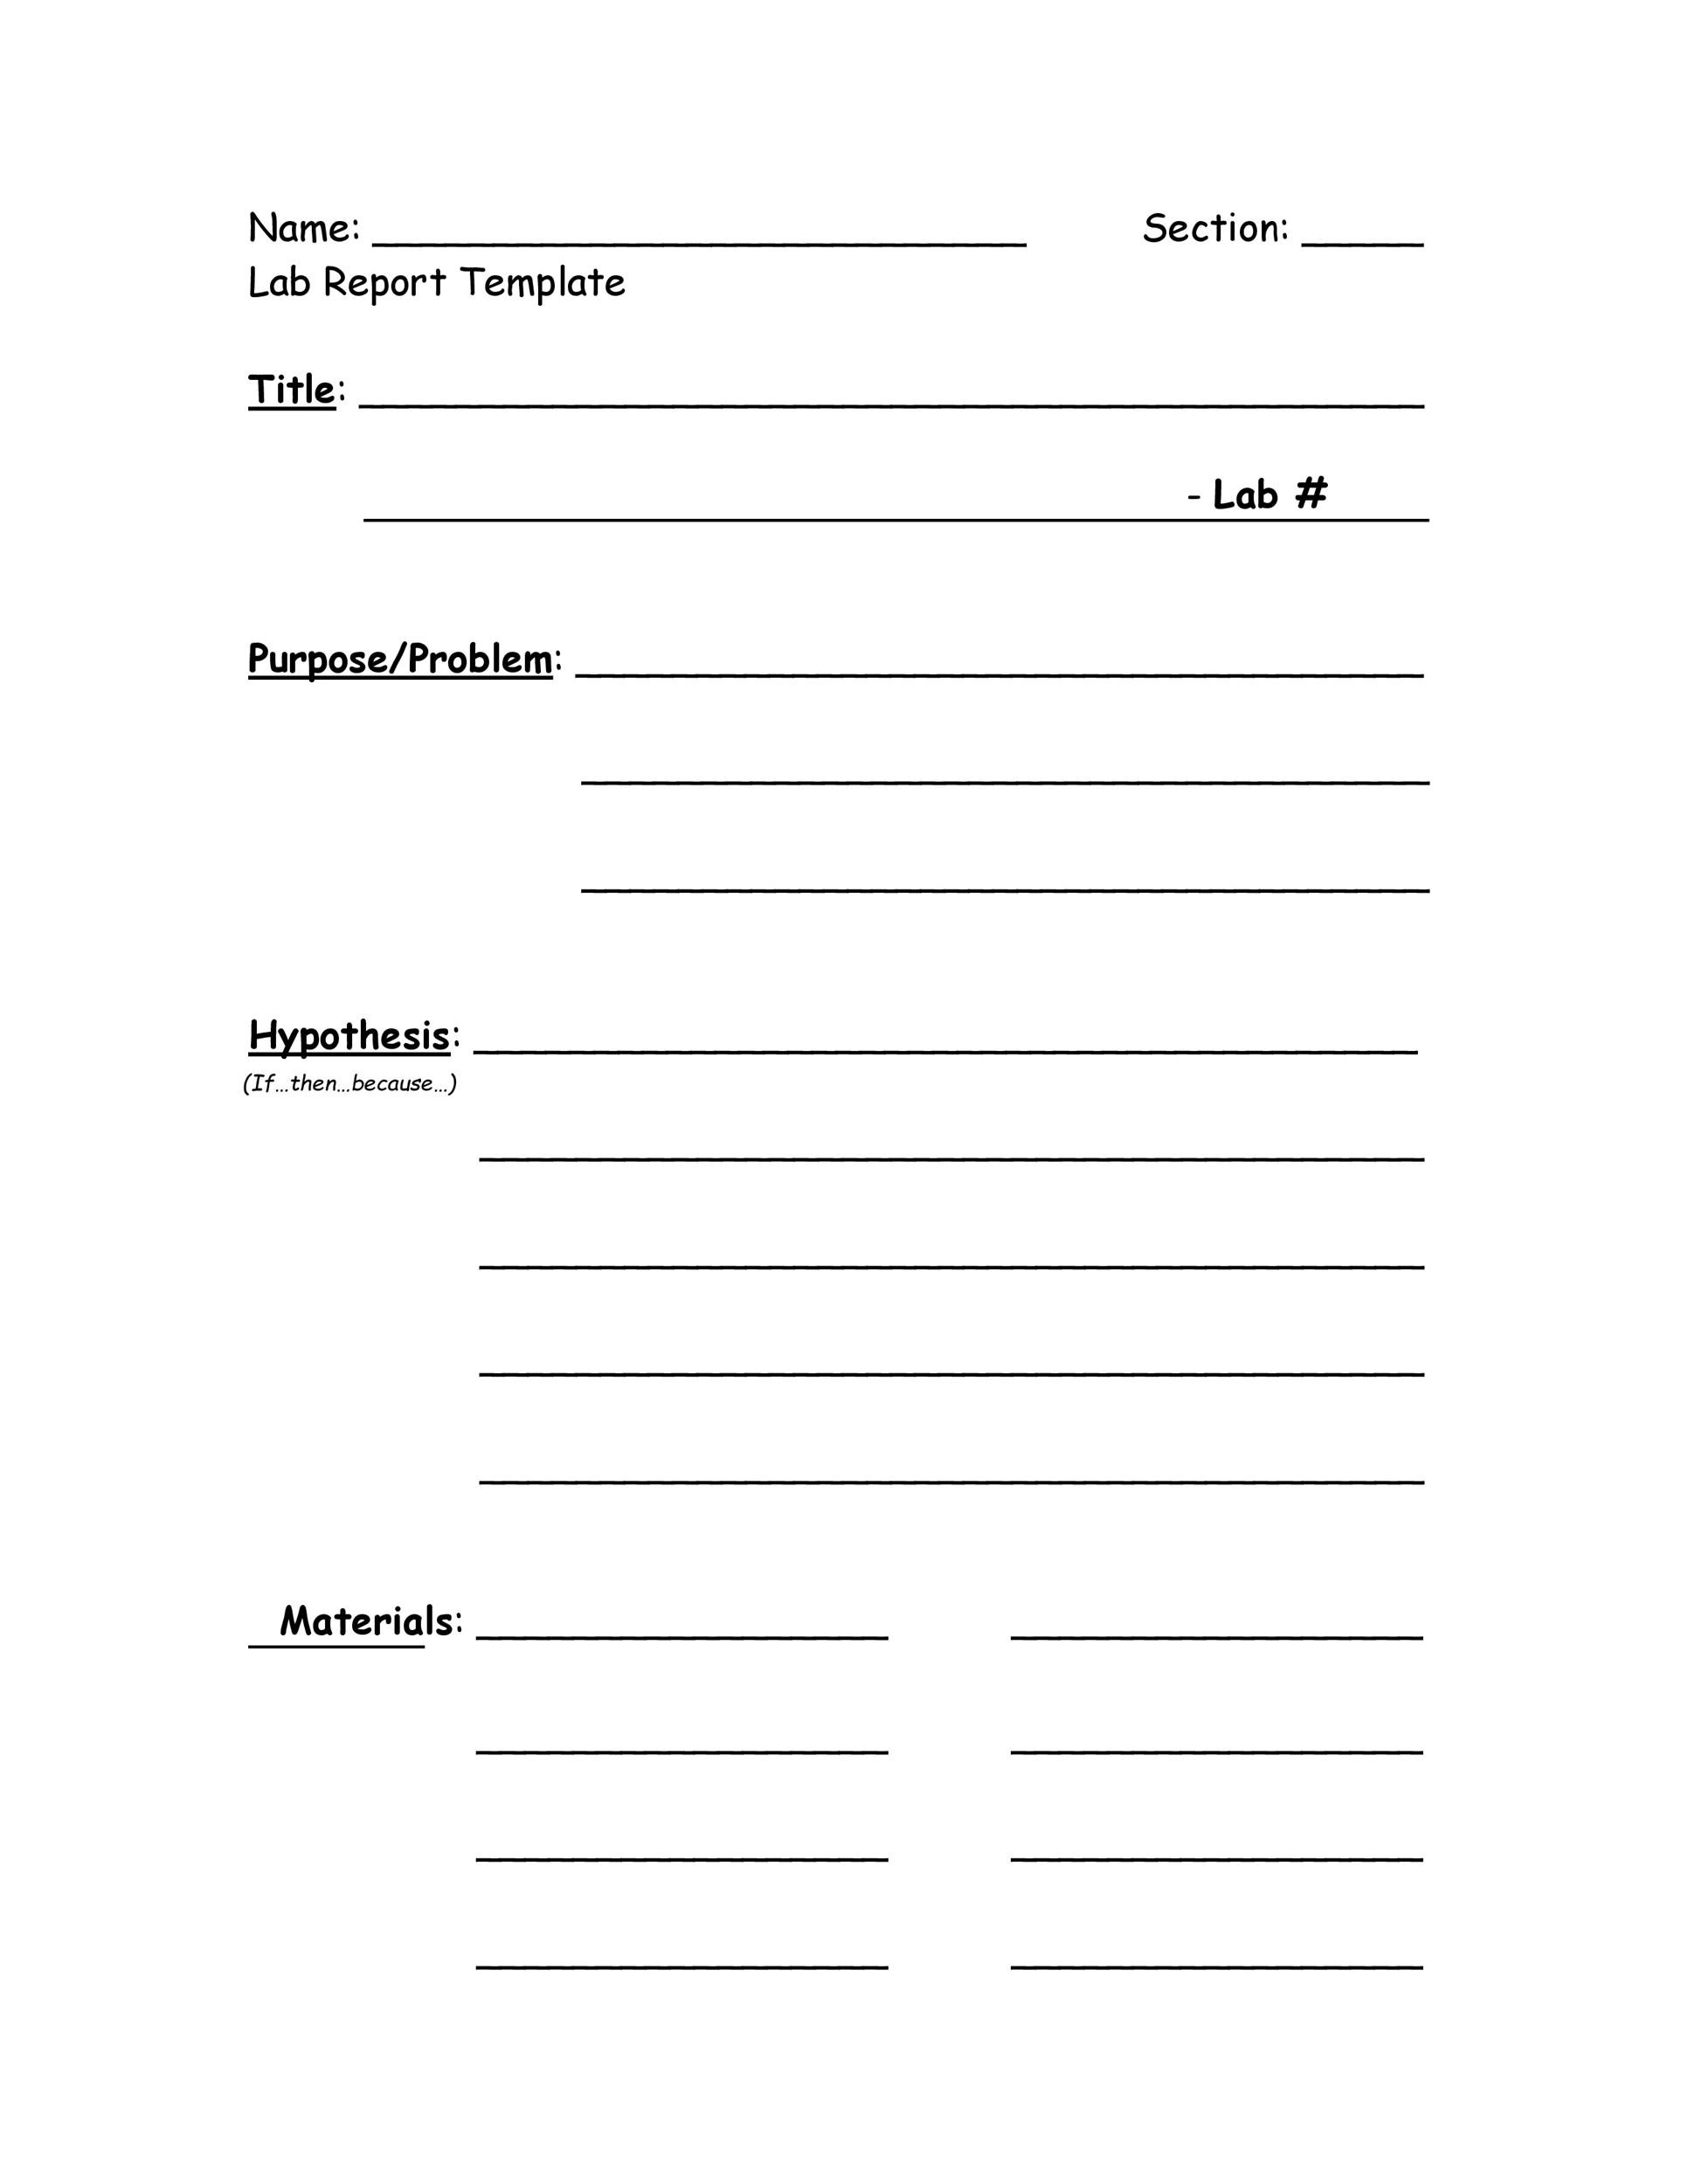 Free lab report template 09